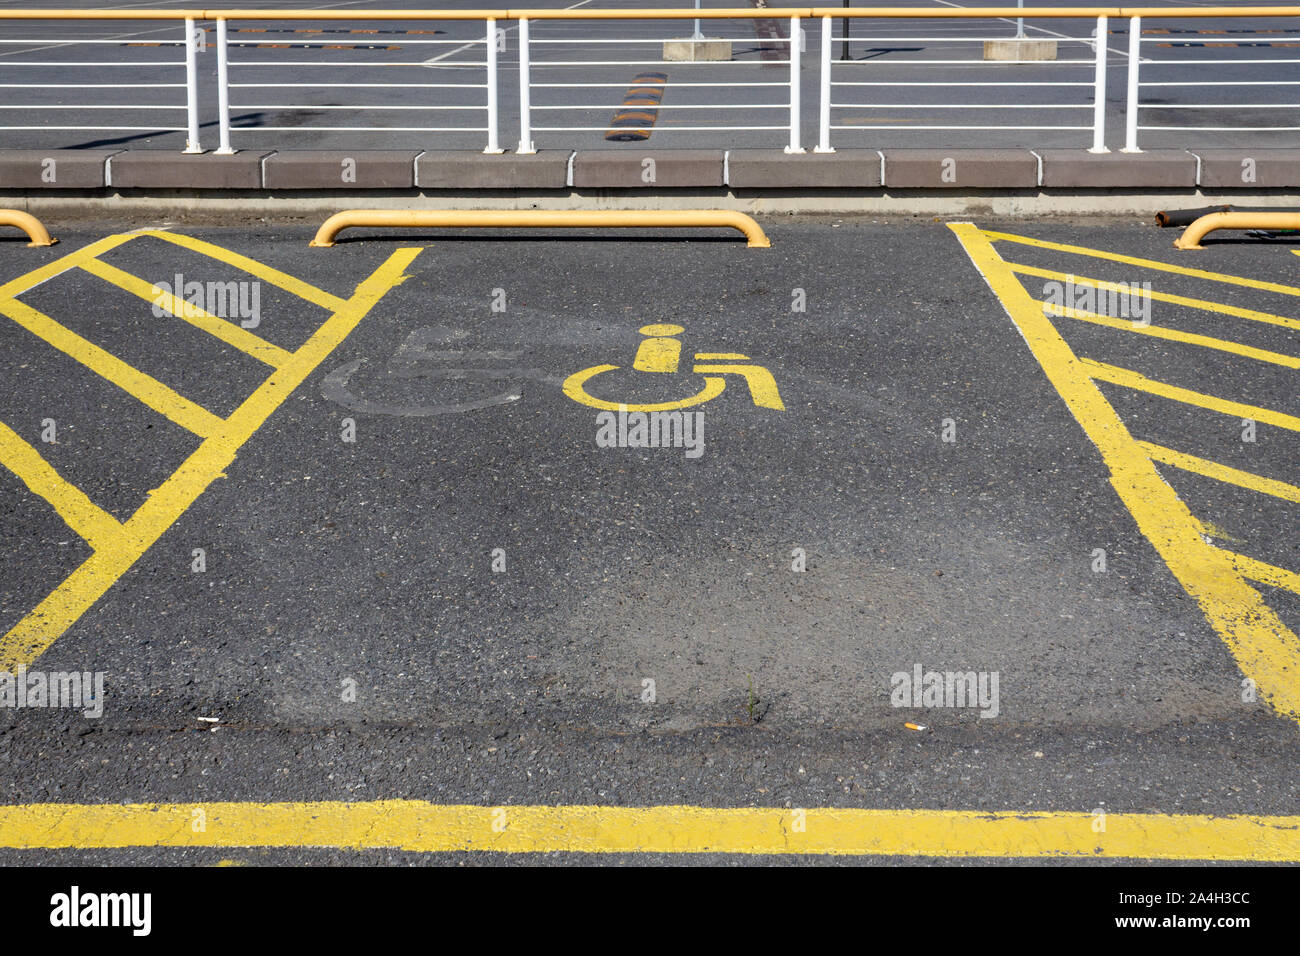 Disabled parking space, disabled sign Stock Photo